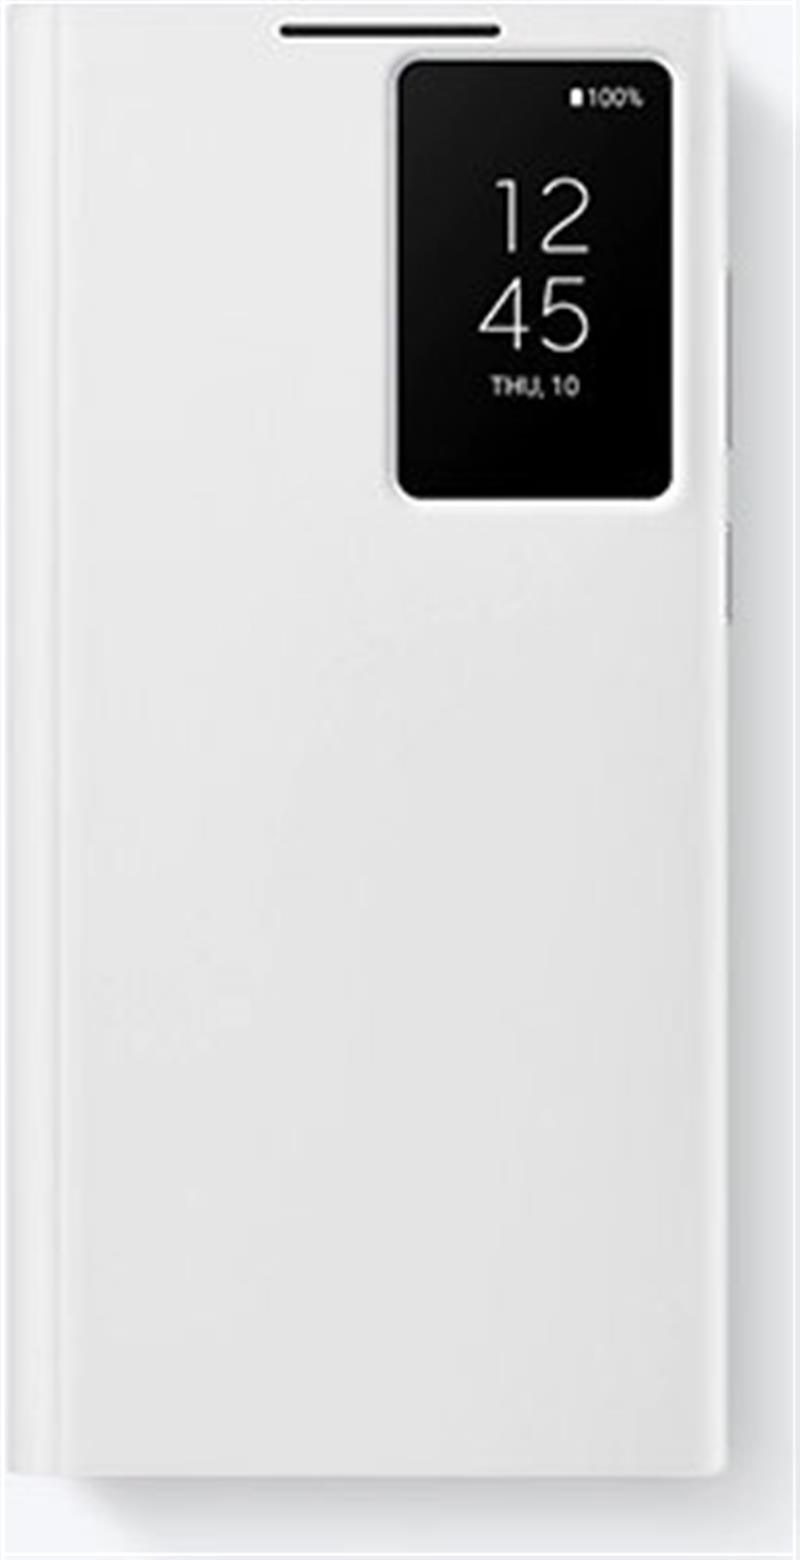 Samsung Galaxy S22 Ultra Clear View Cover White